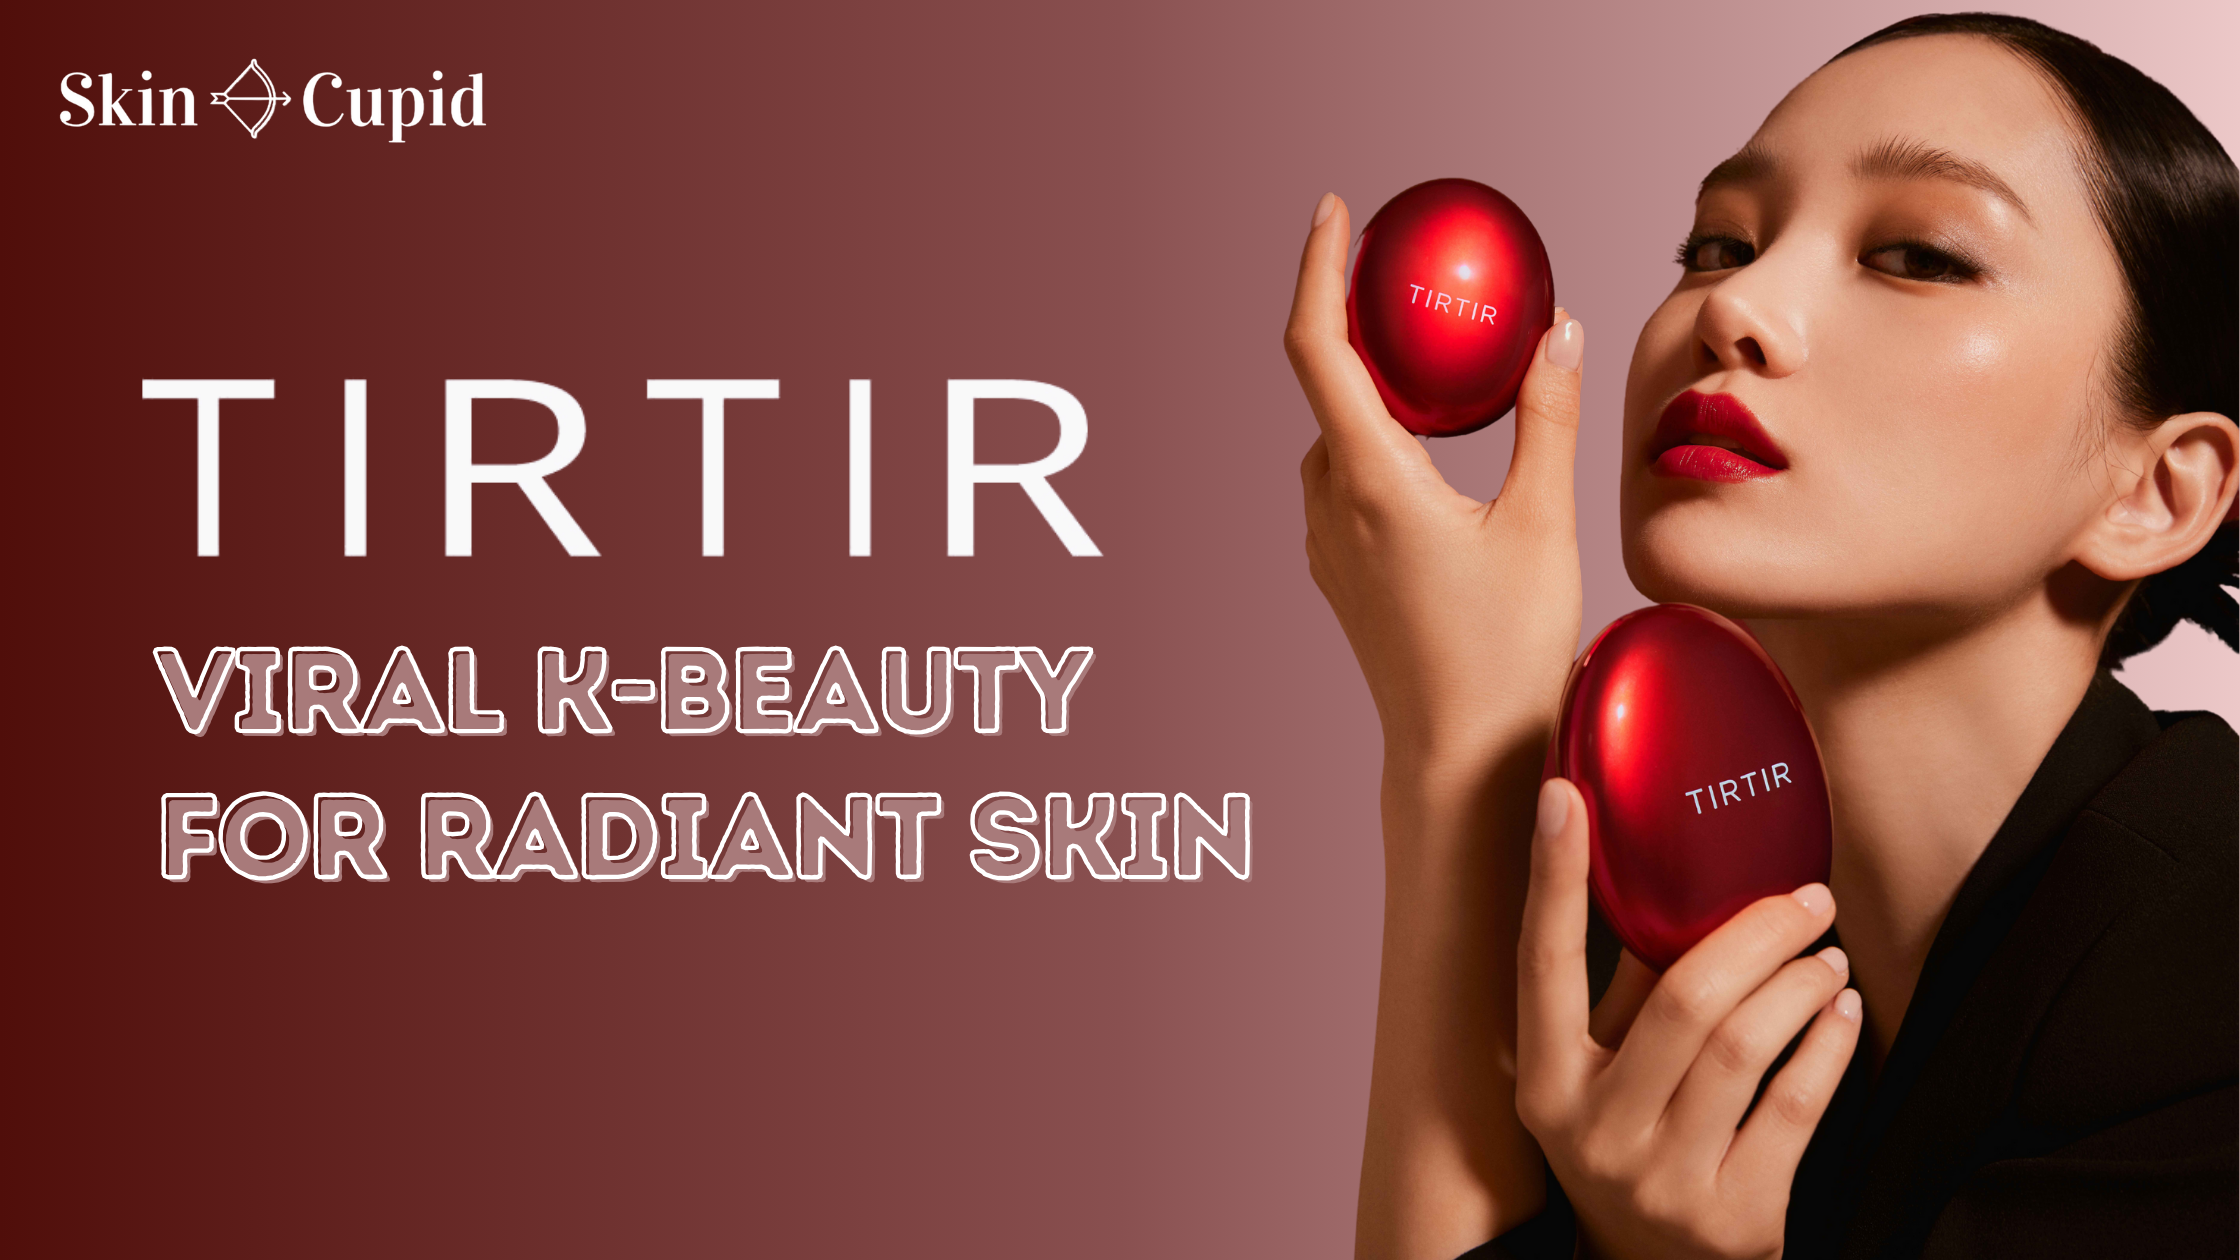 All About TIRTIR: Viral K-Beauty for Radiant Skin – Skin Cupid